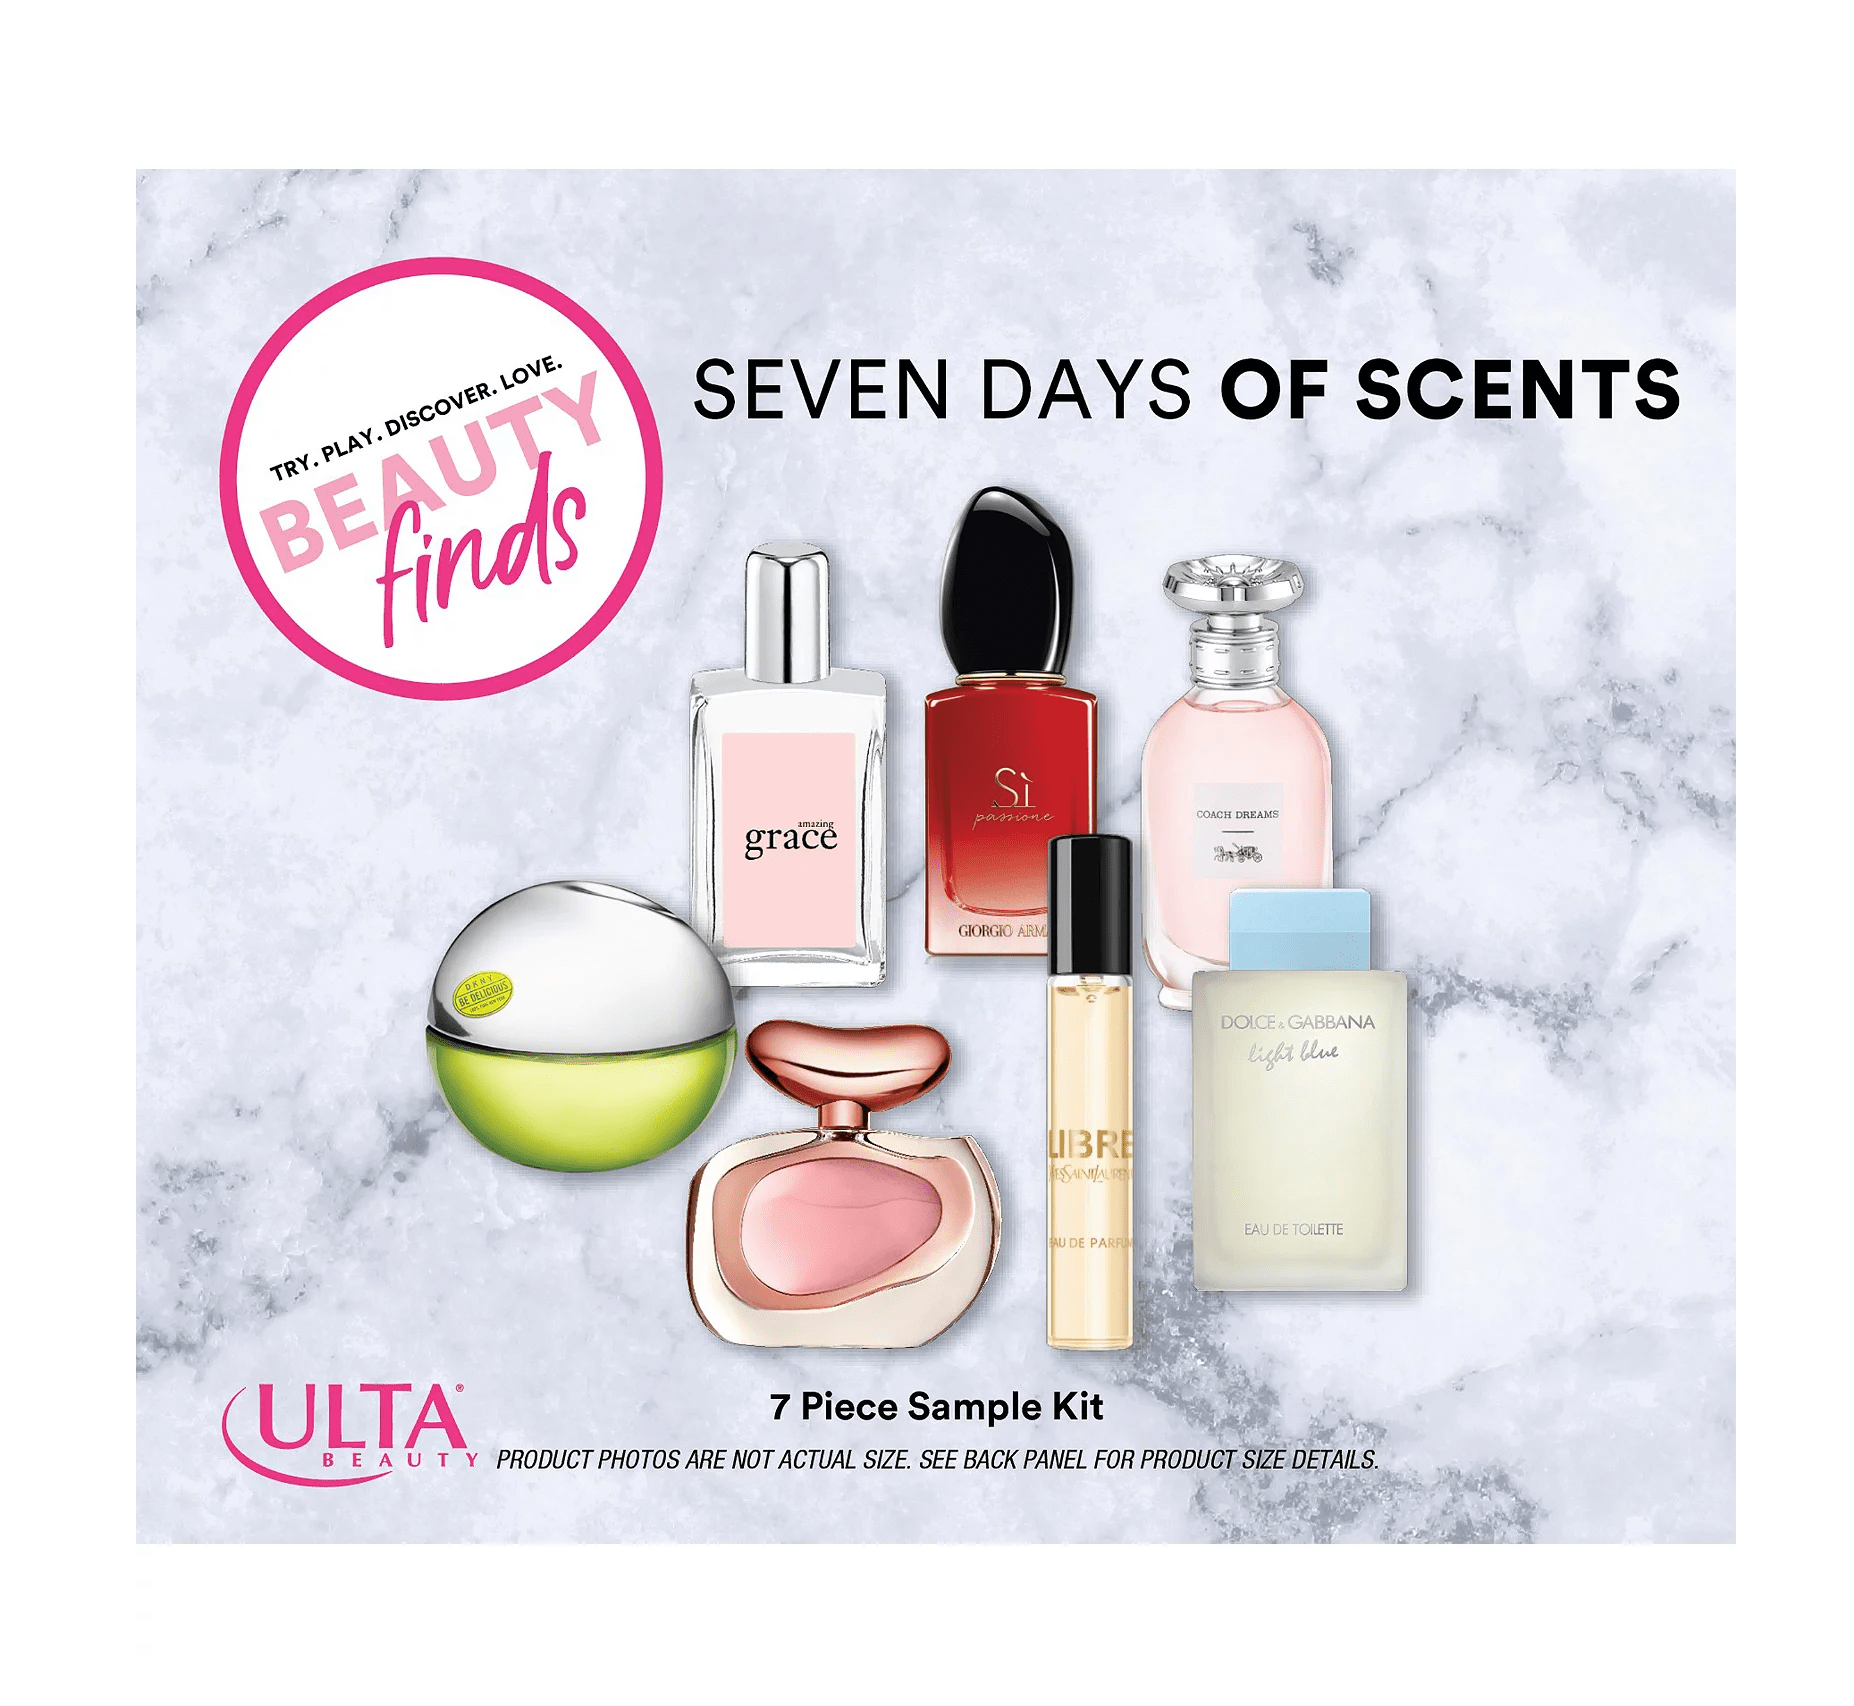 new-ulta-sample-kit-available-now-seven-days-of-scents-sample-kit